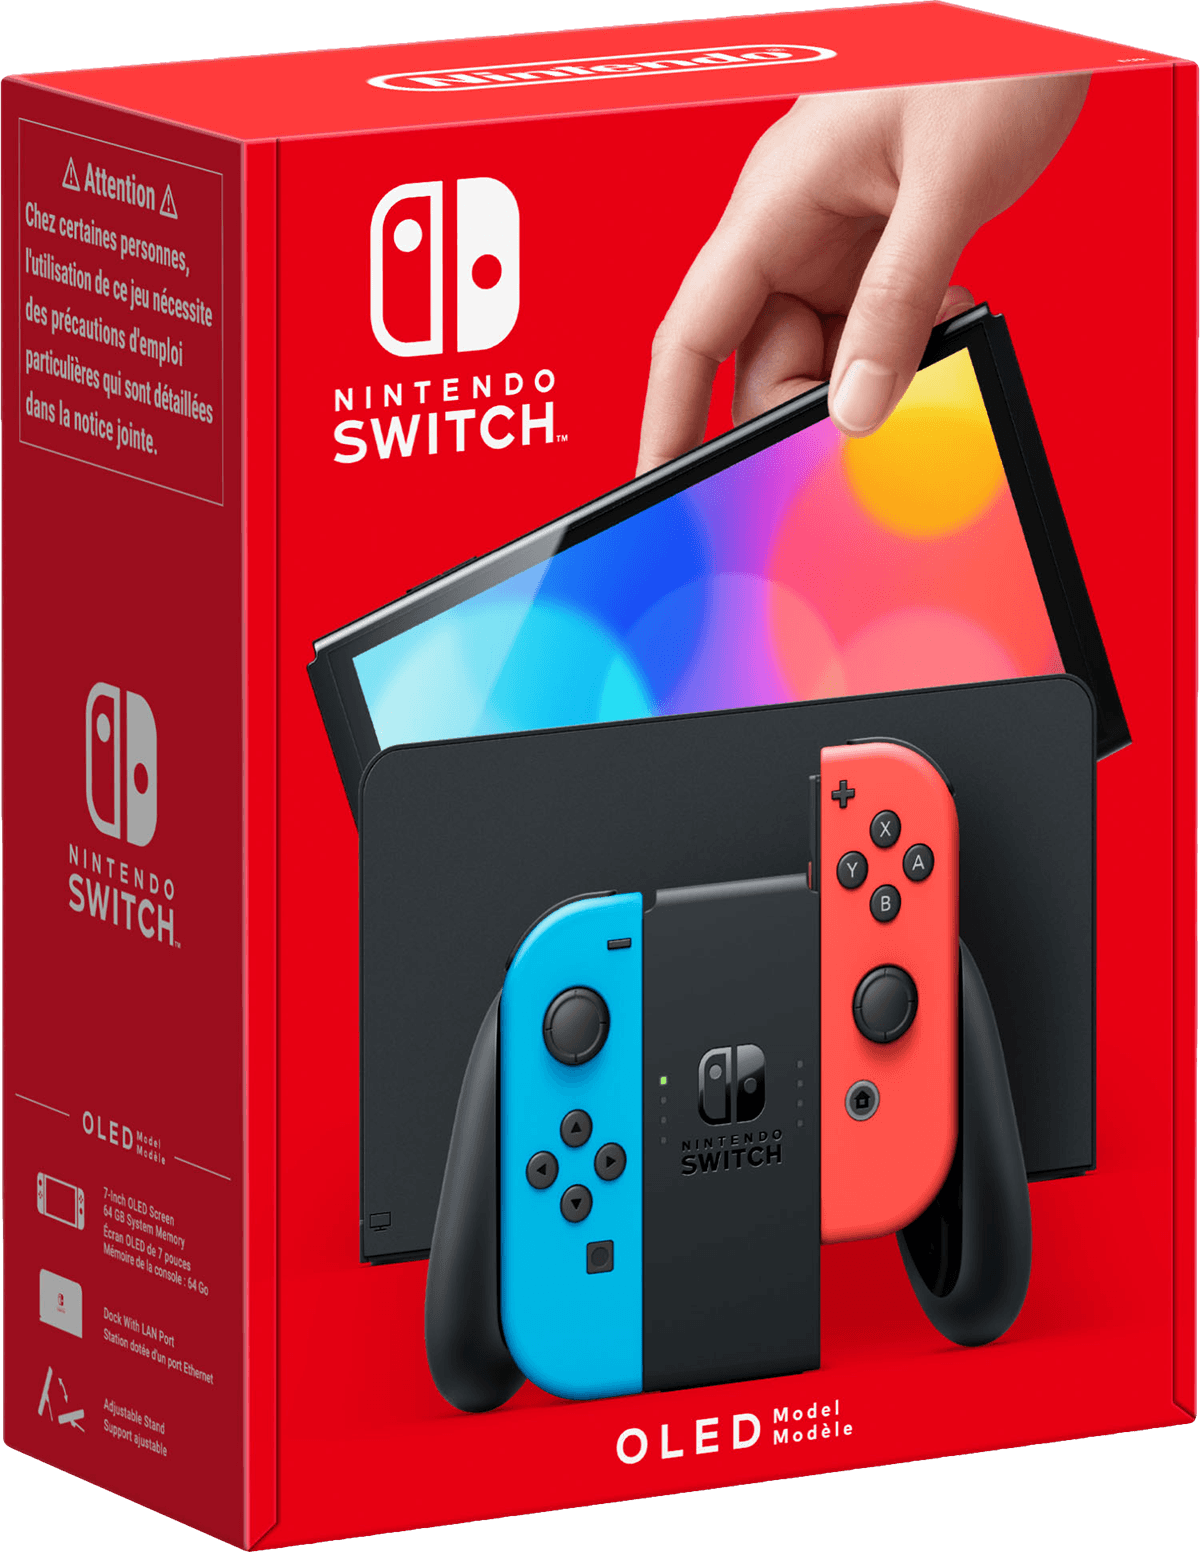 Nintendo Switch 64GB OLED Model Console - Neon Red / Neon Blue (NS